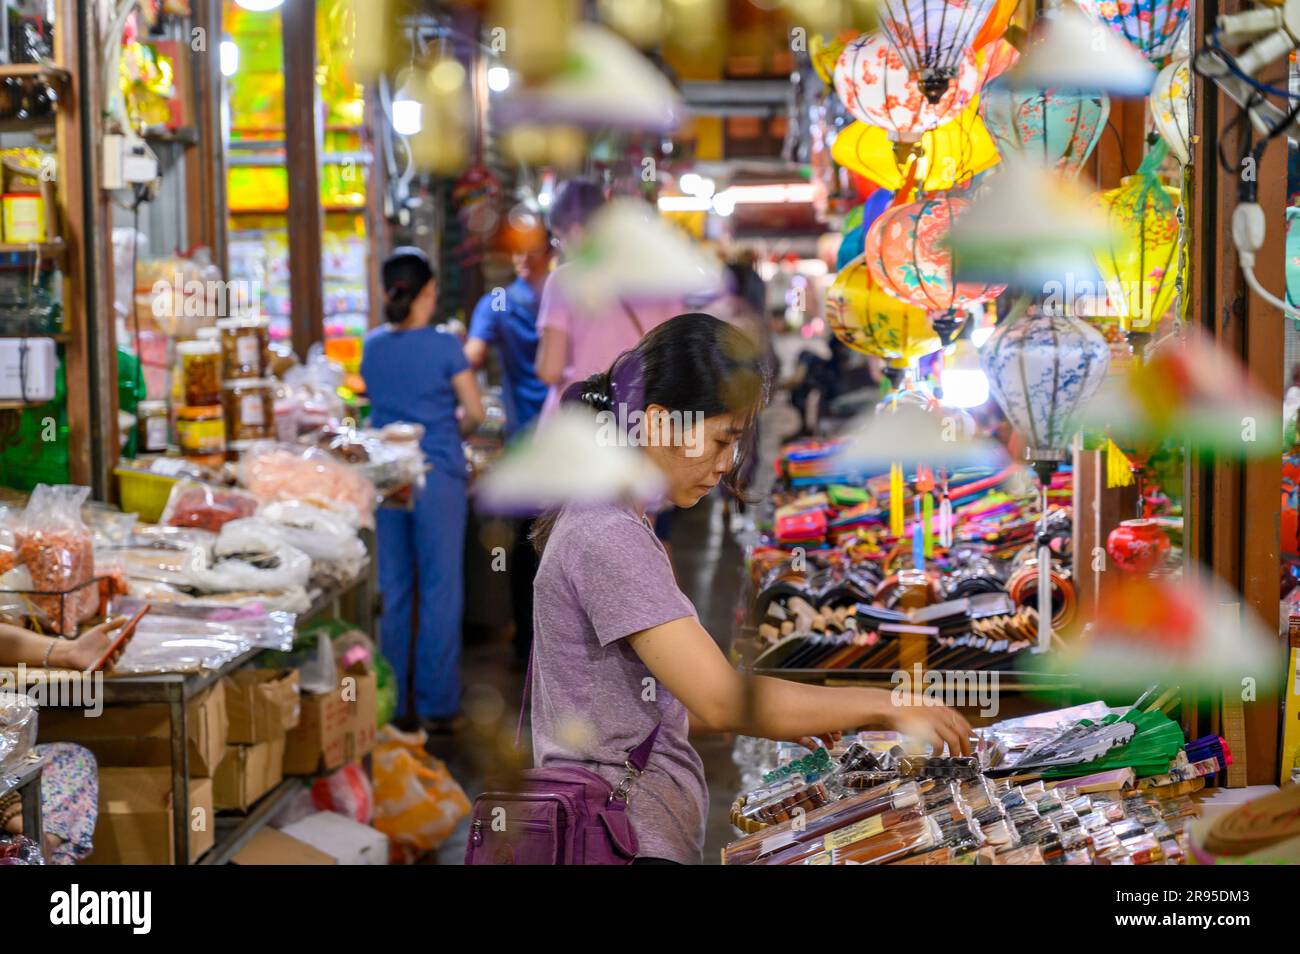 A female vendor tends to her crafts stall in Hoi An Market in old town Hoi An, Vietnam. Stock Photo